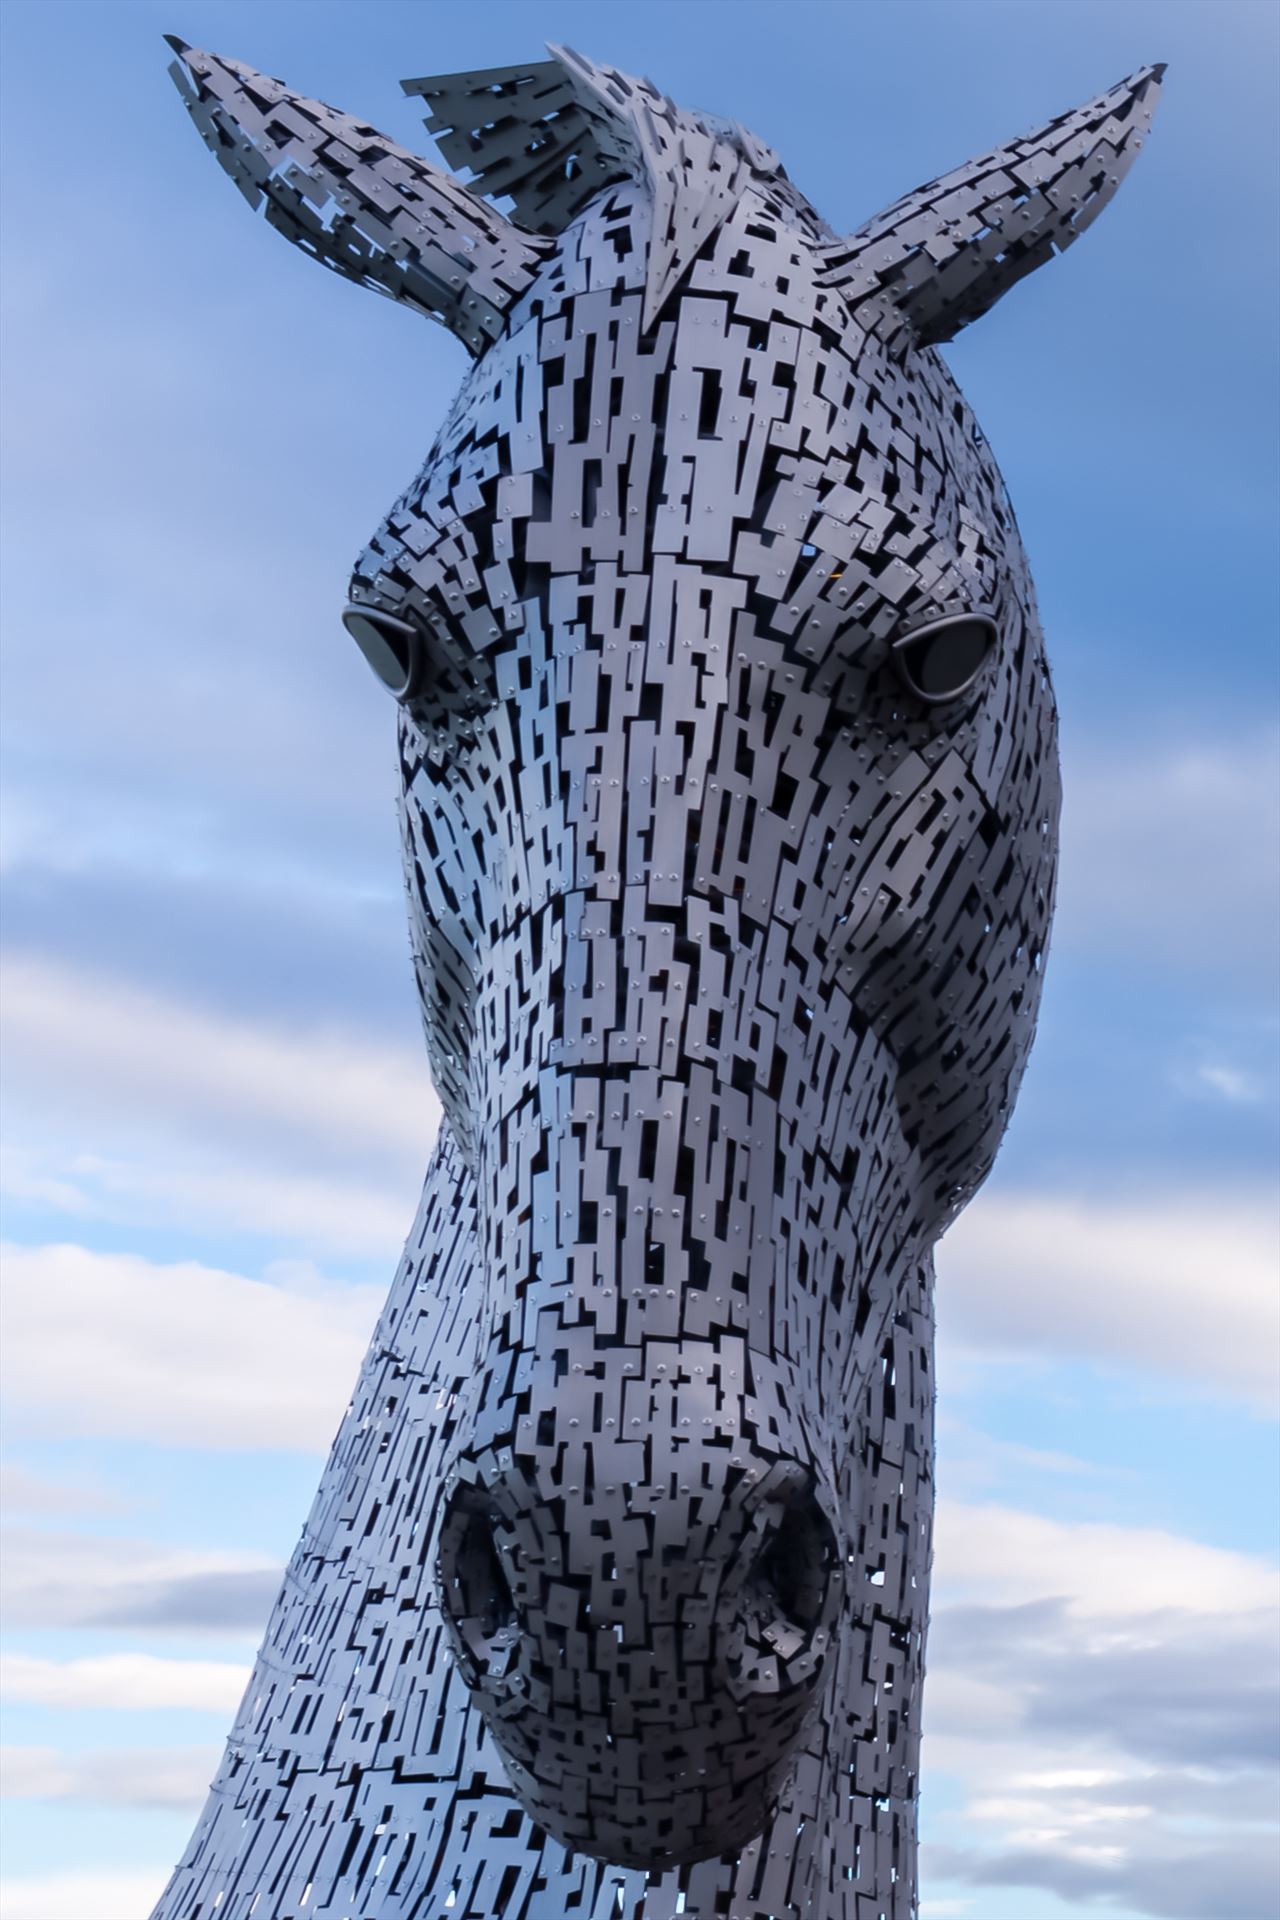 One of the Kelpies - The Kelpies are 30-metre-high horse-head sculptures, standing next to a new extension to the Forth and Clyde Canal at Falkirk. The Kelpies are a monument to horse powered heritage across Scotland. by philreay